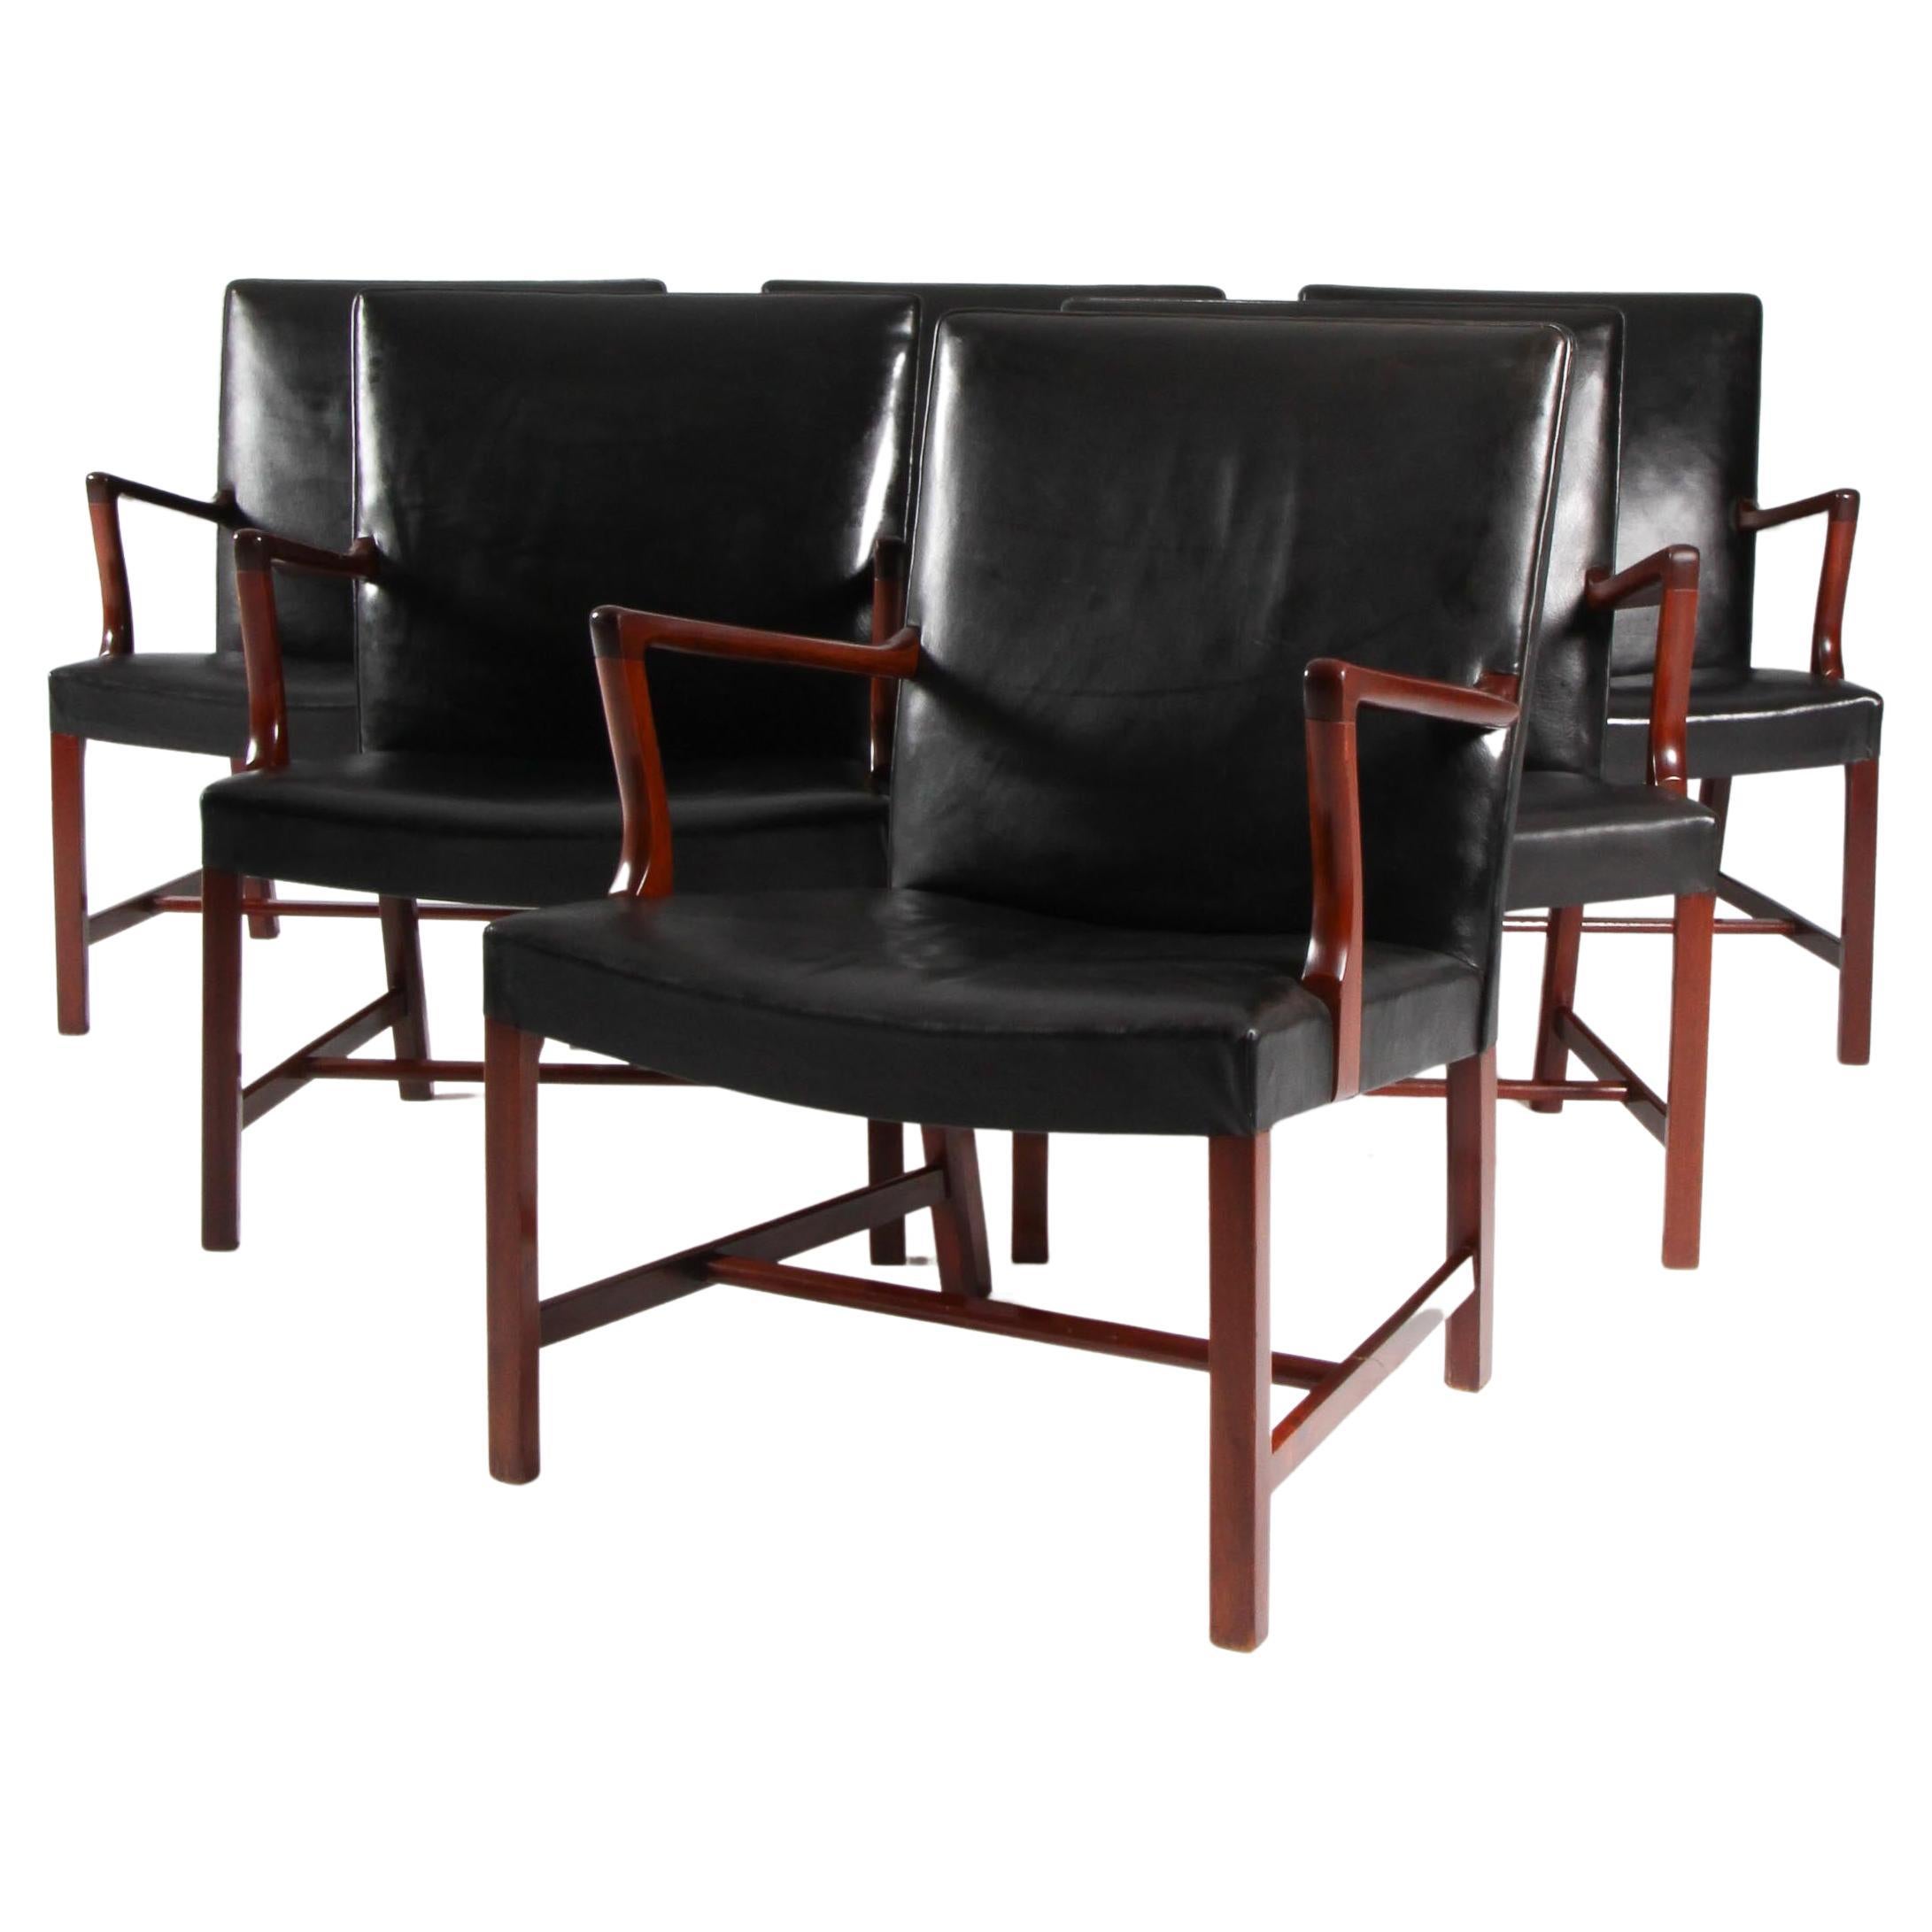 Hans J. Wegner Early Set of Six Arm Chairs in Mahogany and Leather, 1950s